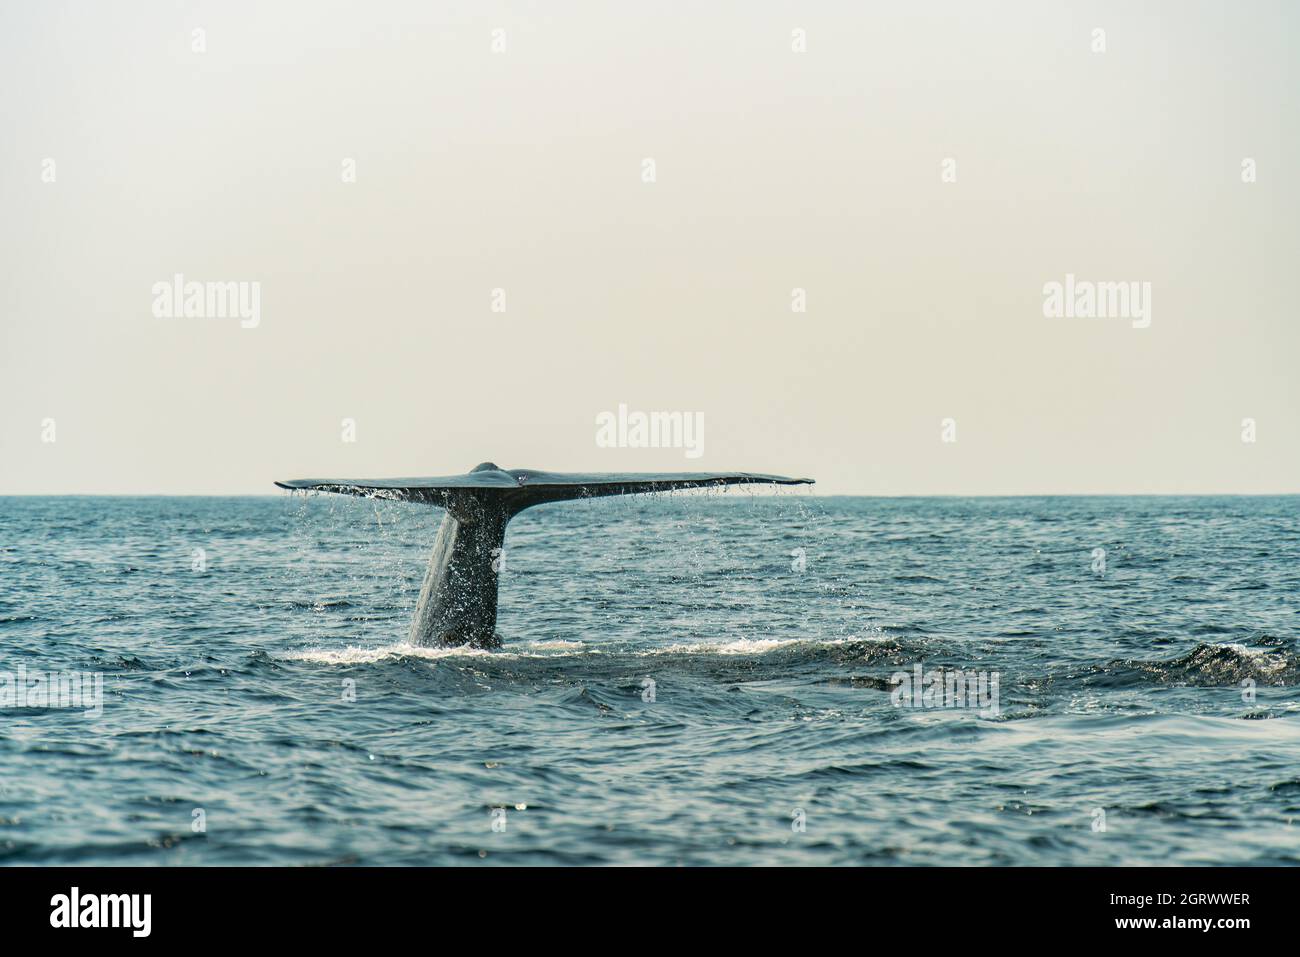 Humpback whale tail flicking up. Seascape with a whale tail. Megaptera novaeangliae. Stock Photo